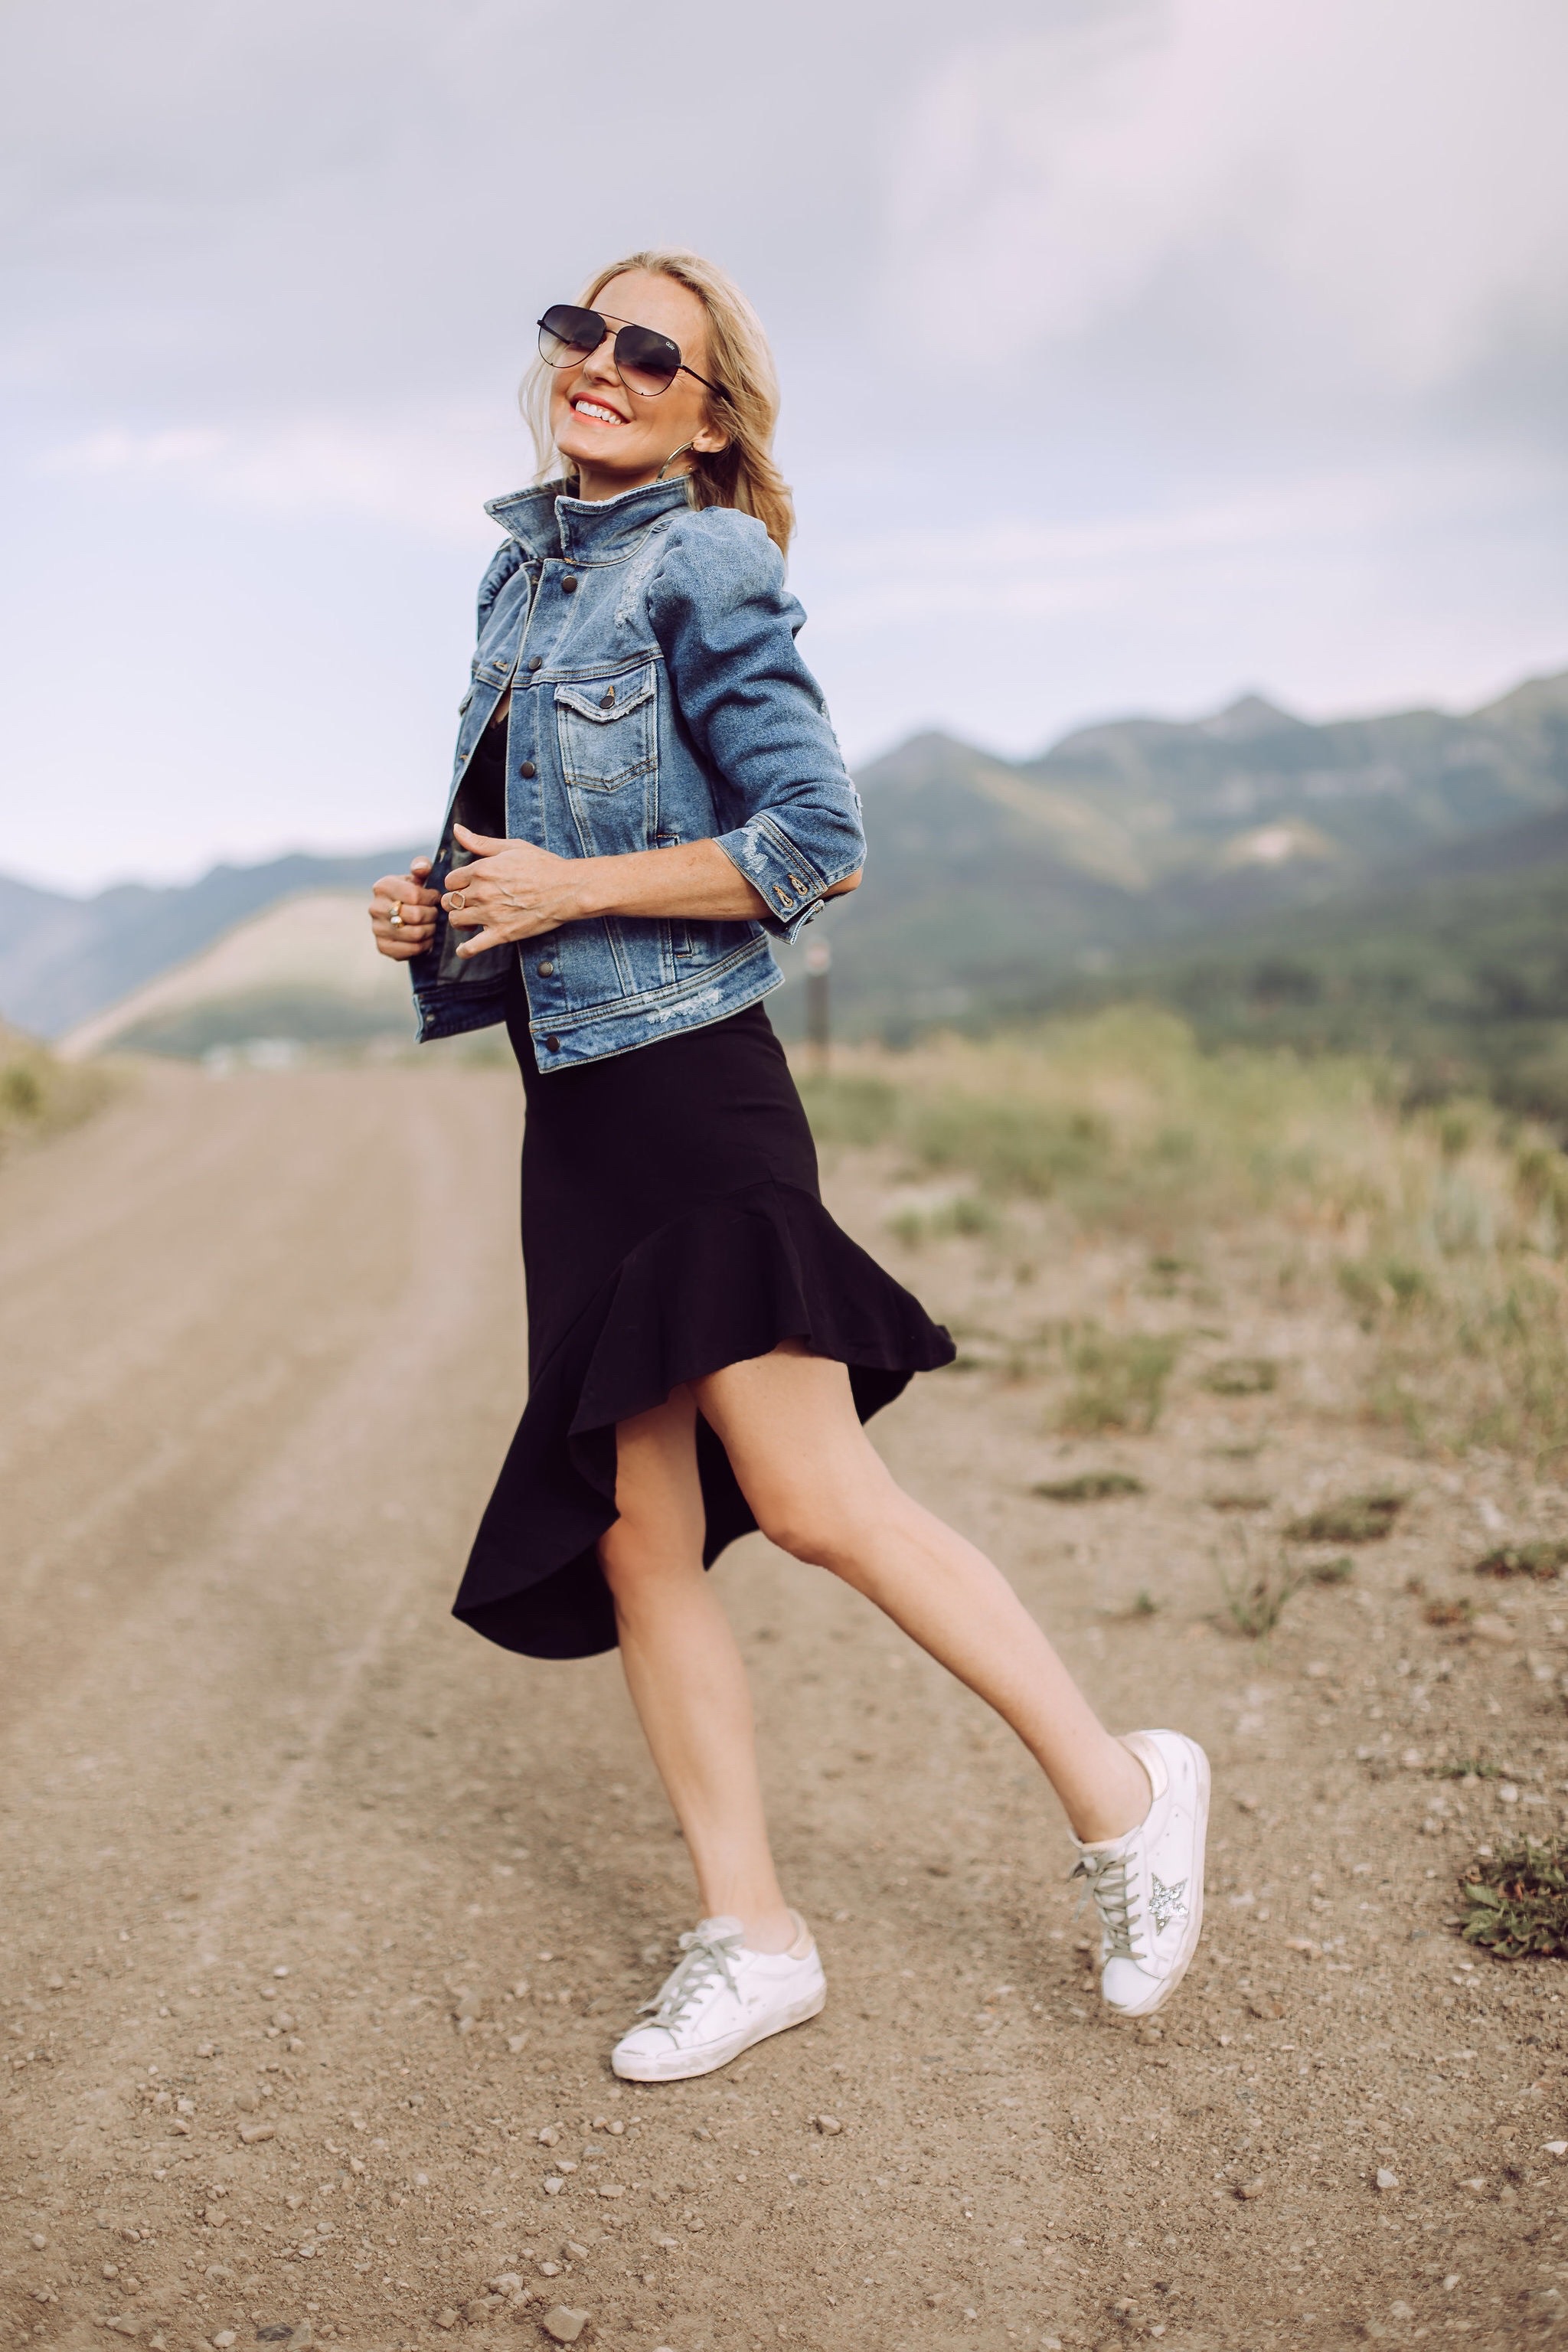 Day To Date Night Outfits, fashion blogger Busbee Style wearing black susana monaco dress, golden goose sneakers, retrofete denim puff sleeve jacket, aviator sunglasses in Telluride, Colorado